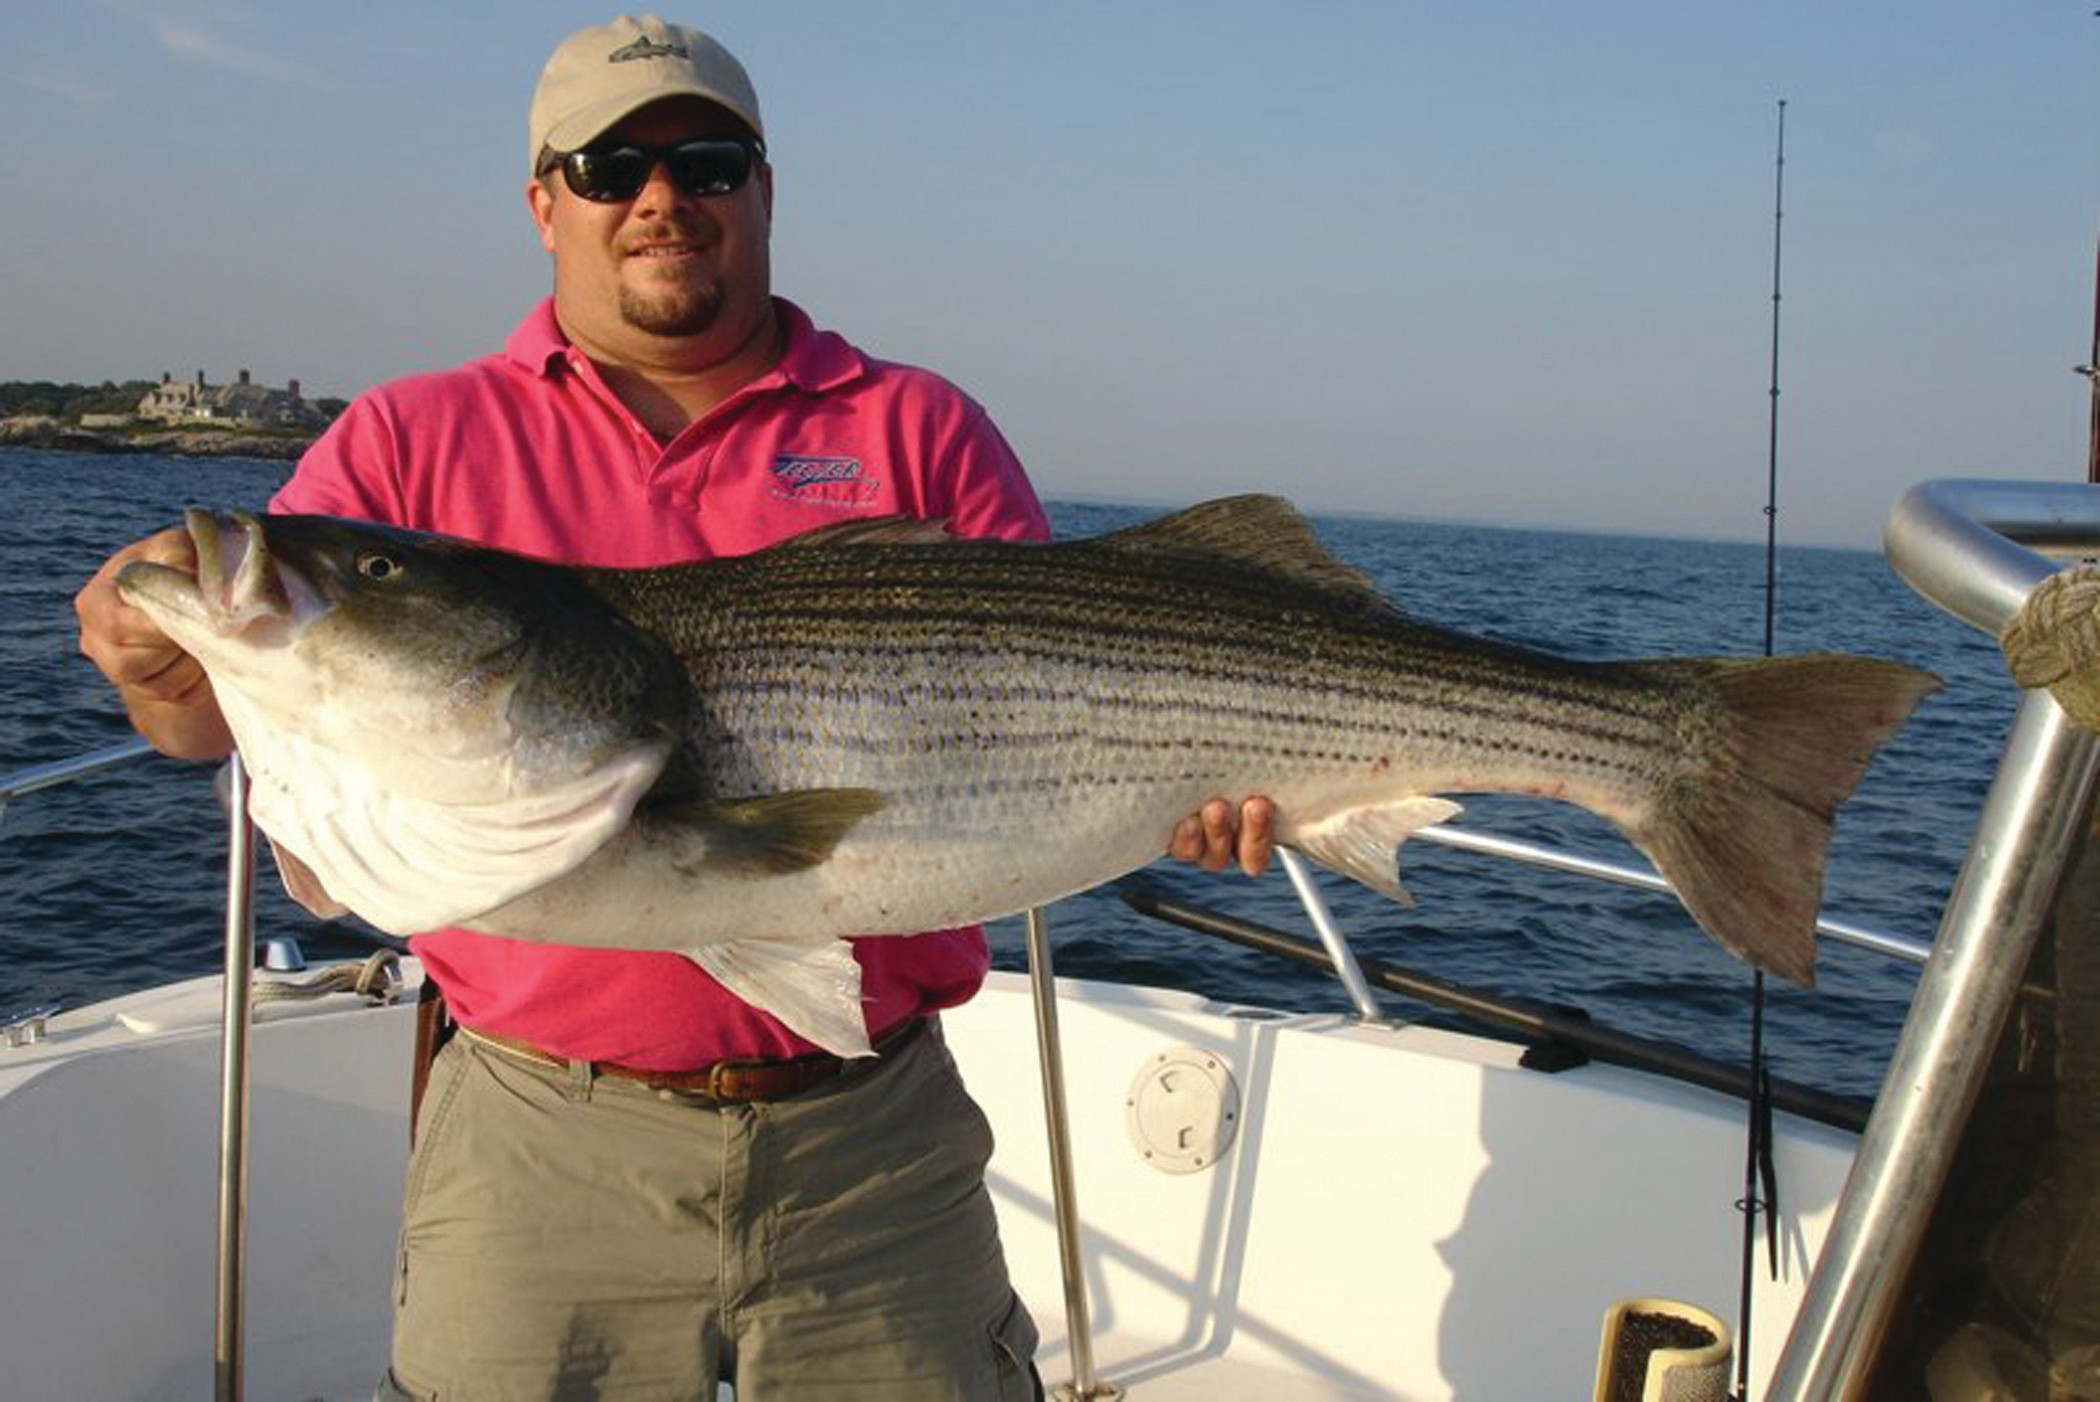 GIVING ADVICE: Capt. Eric Thomas of Teezer 77 Guide Service will be one of three panelists on “How to catch spring striped bass” on Monday, Feb. 29 at 7 p.m. at the West Valley Inn.